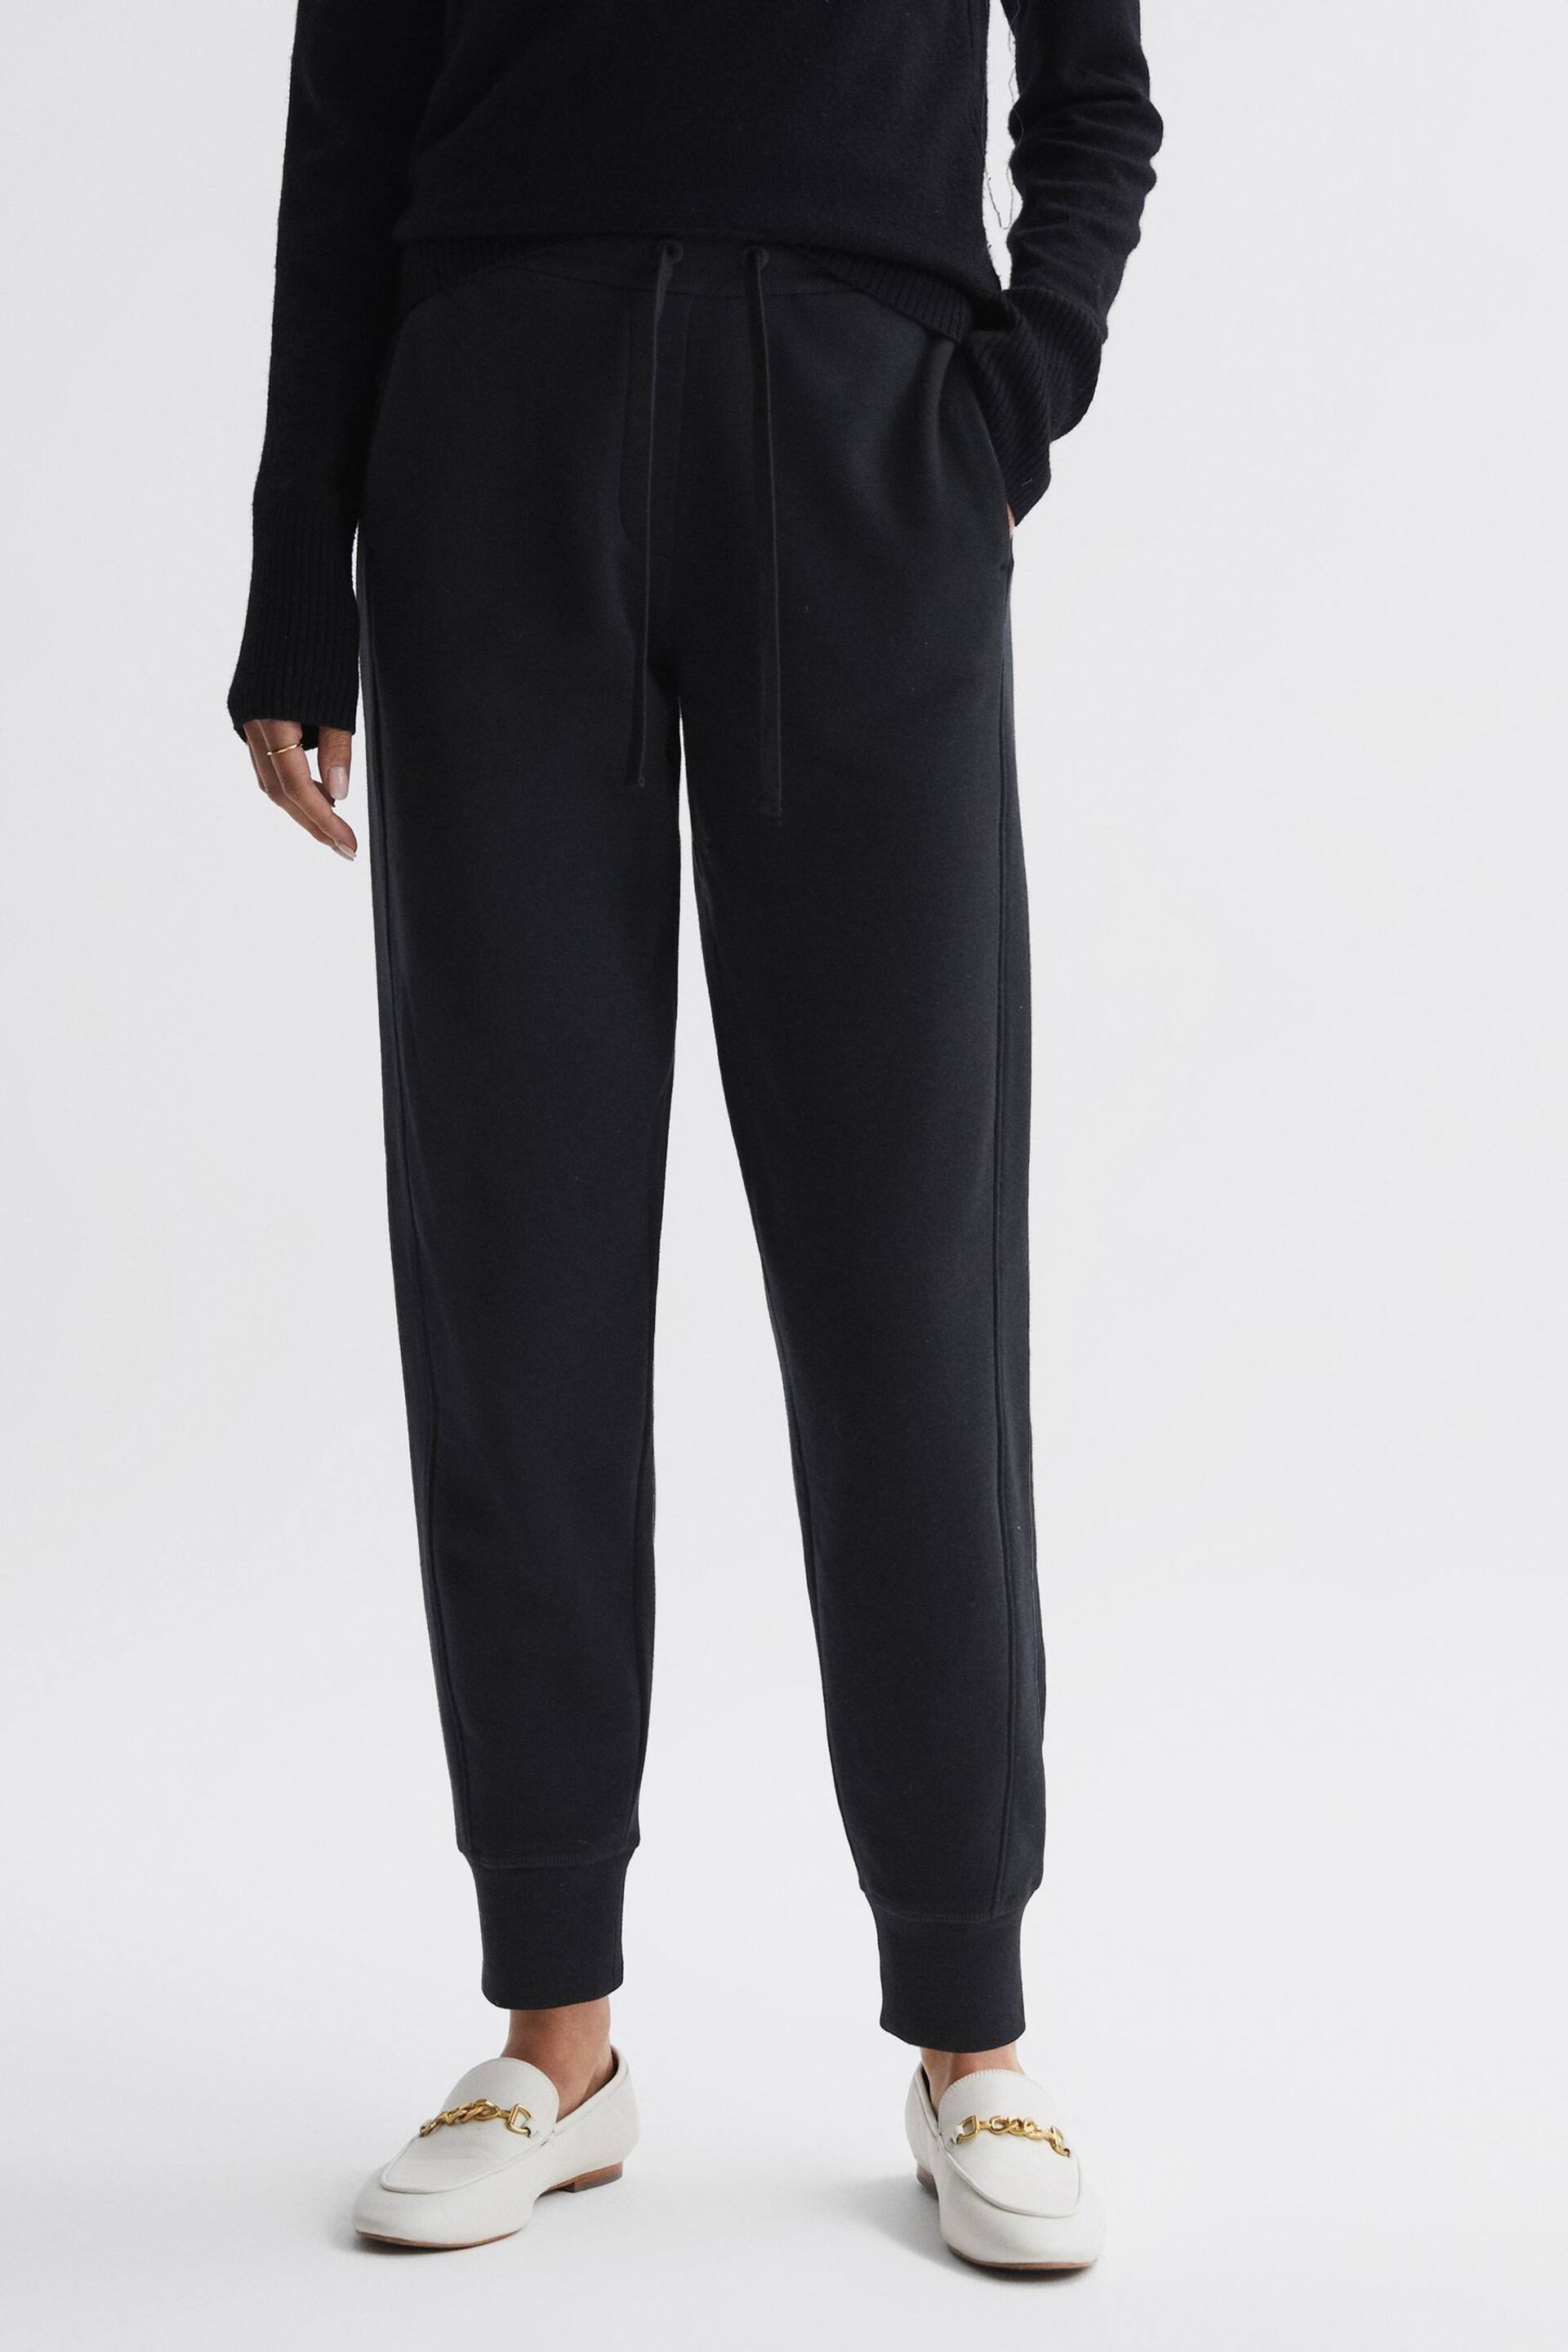 Reiss Black Bronte Cotton Drawstring Cuffed Joggers - Image 1 of 4